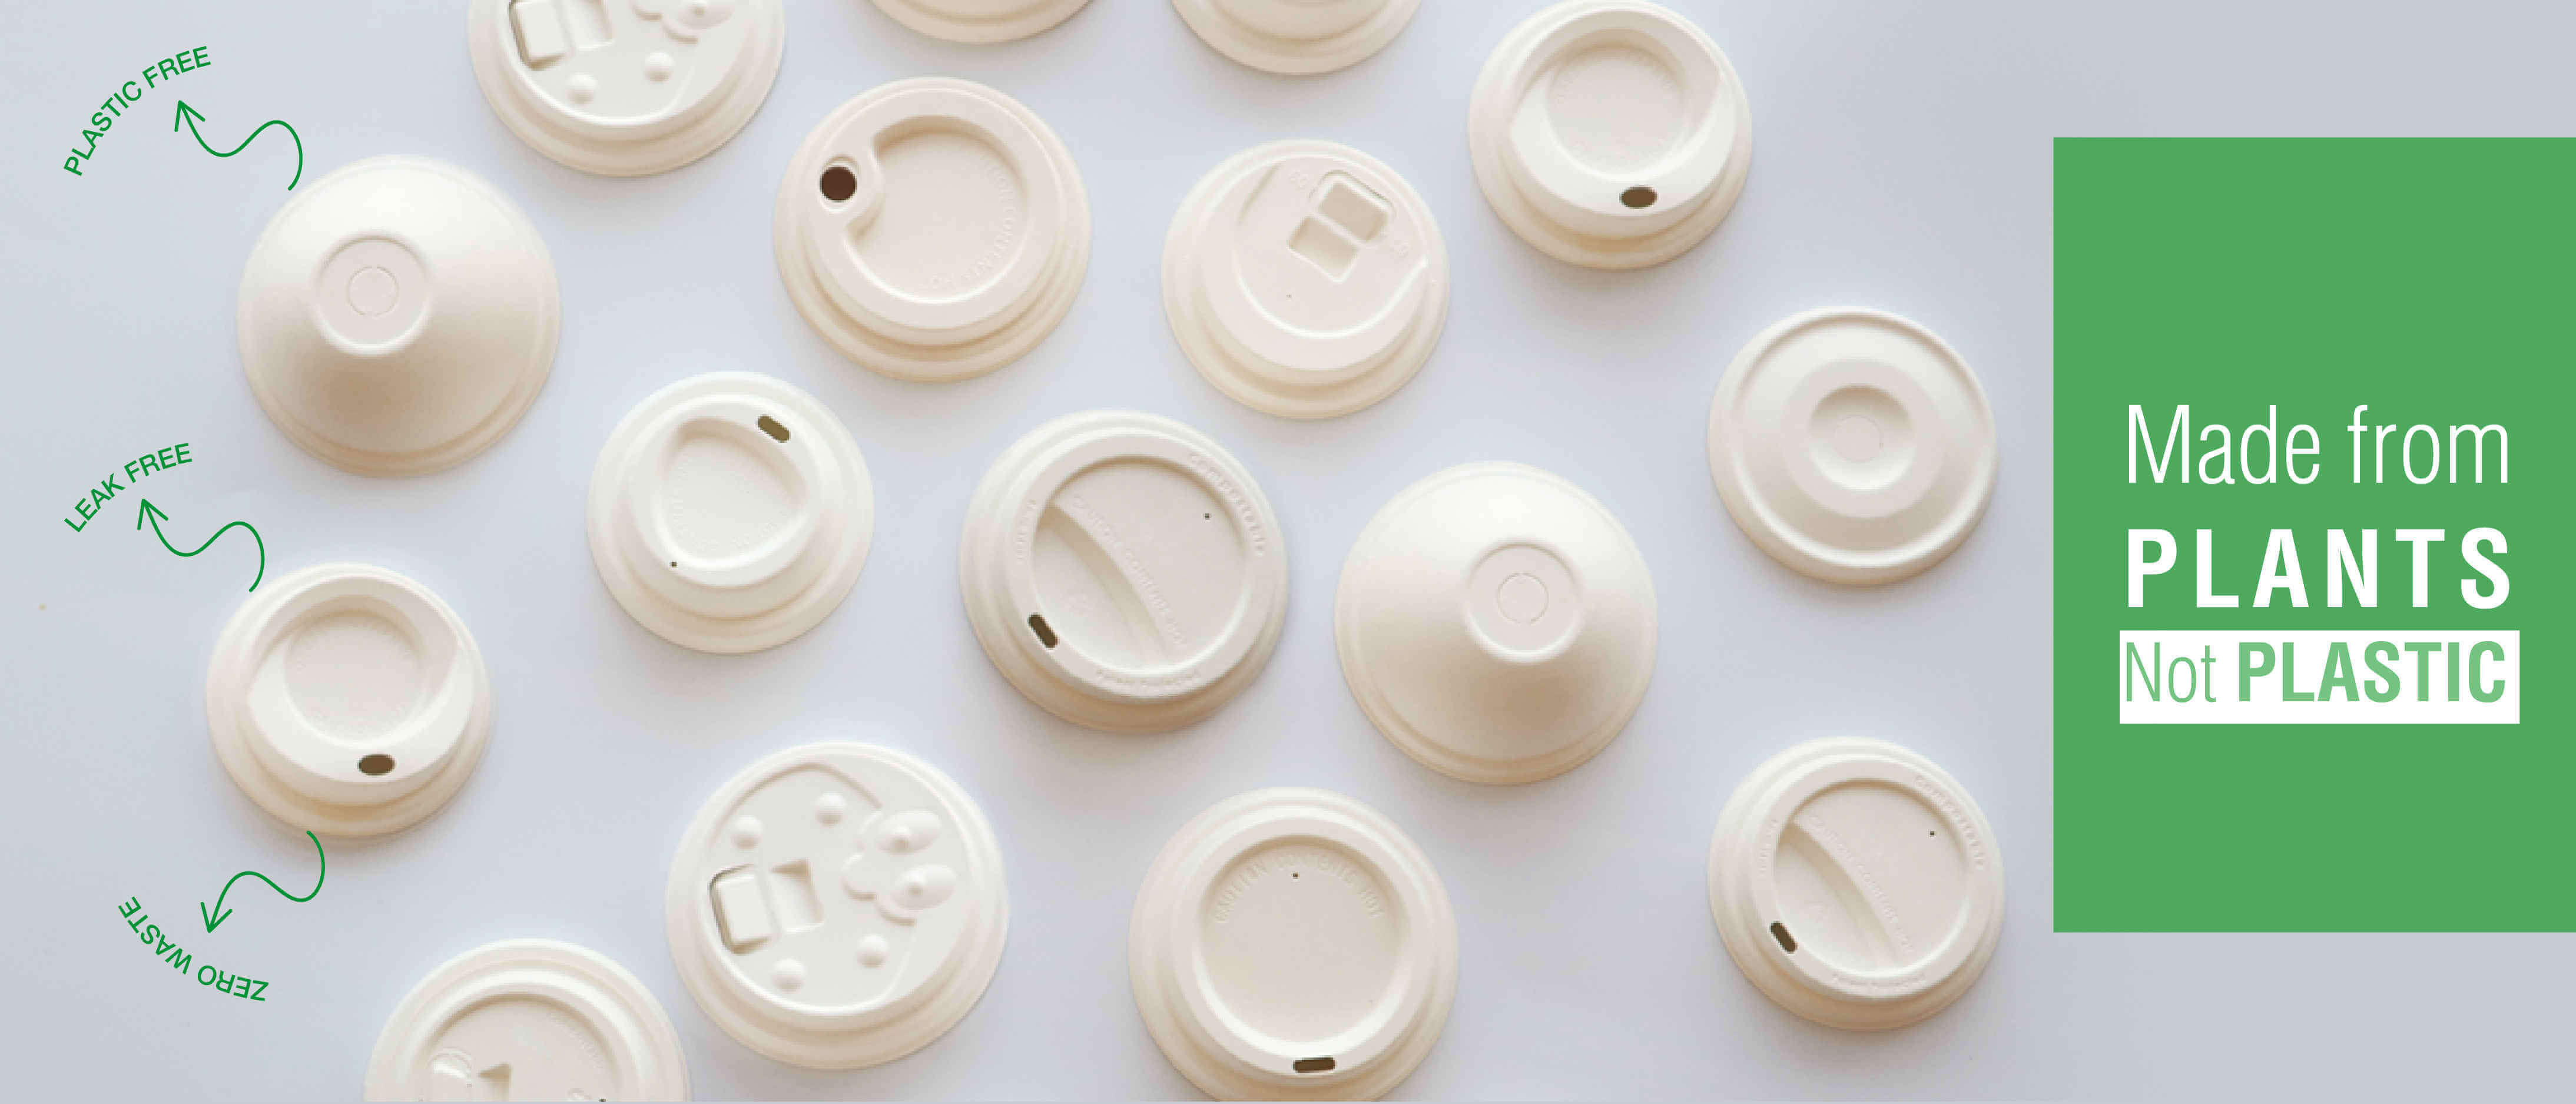 Molded pulp bagagsse paper cup lids